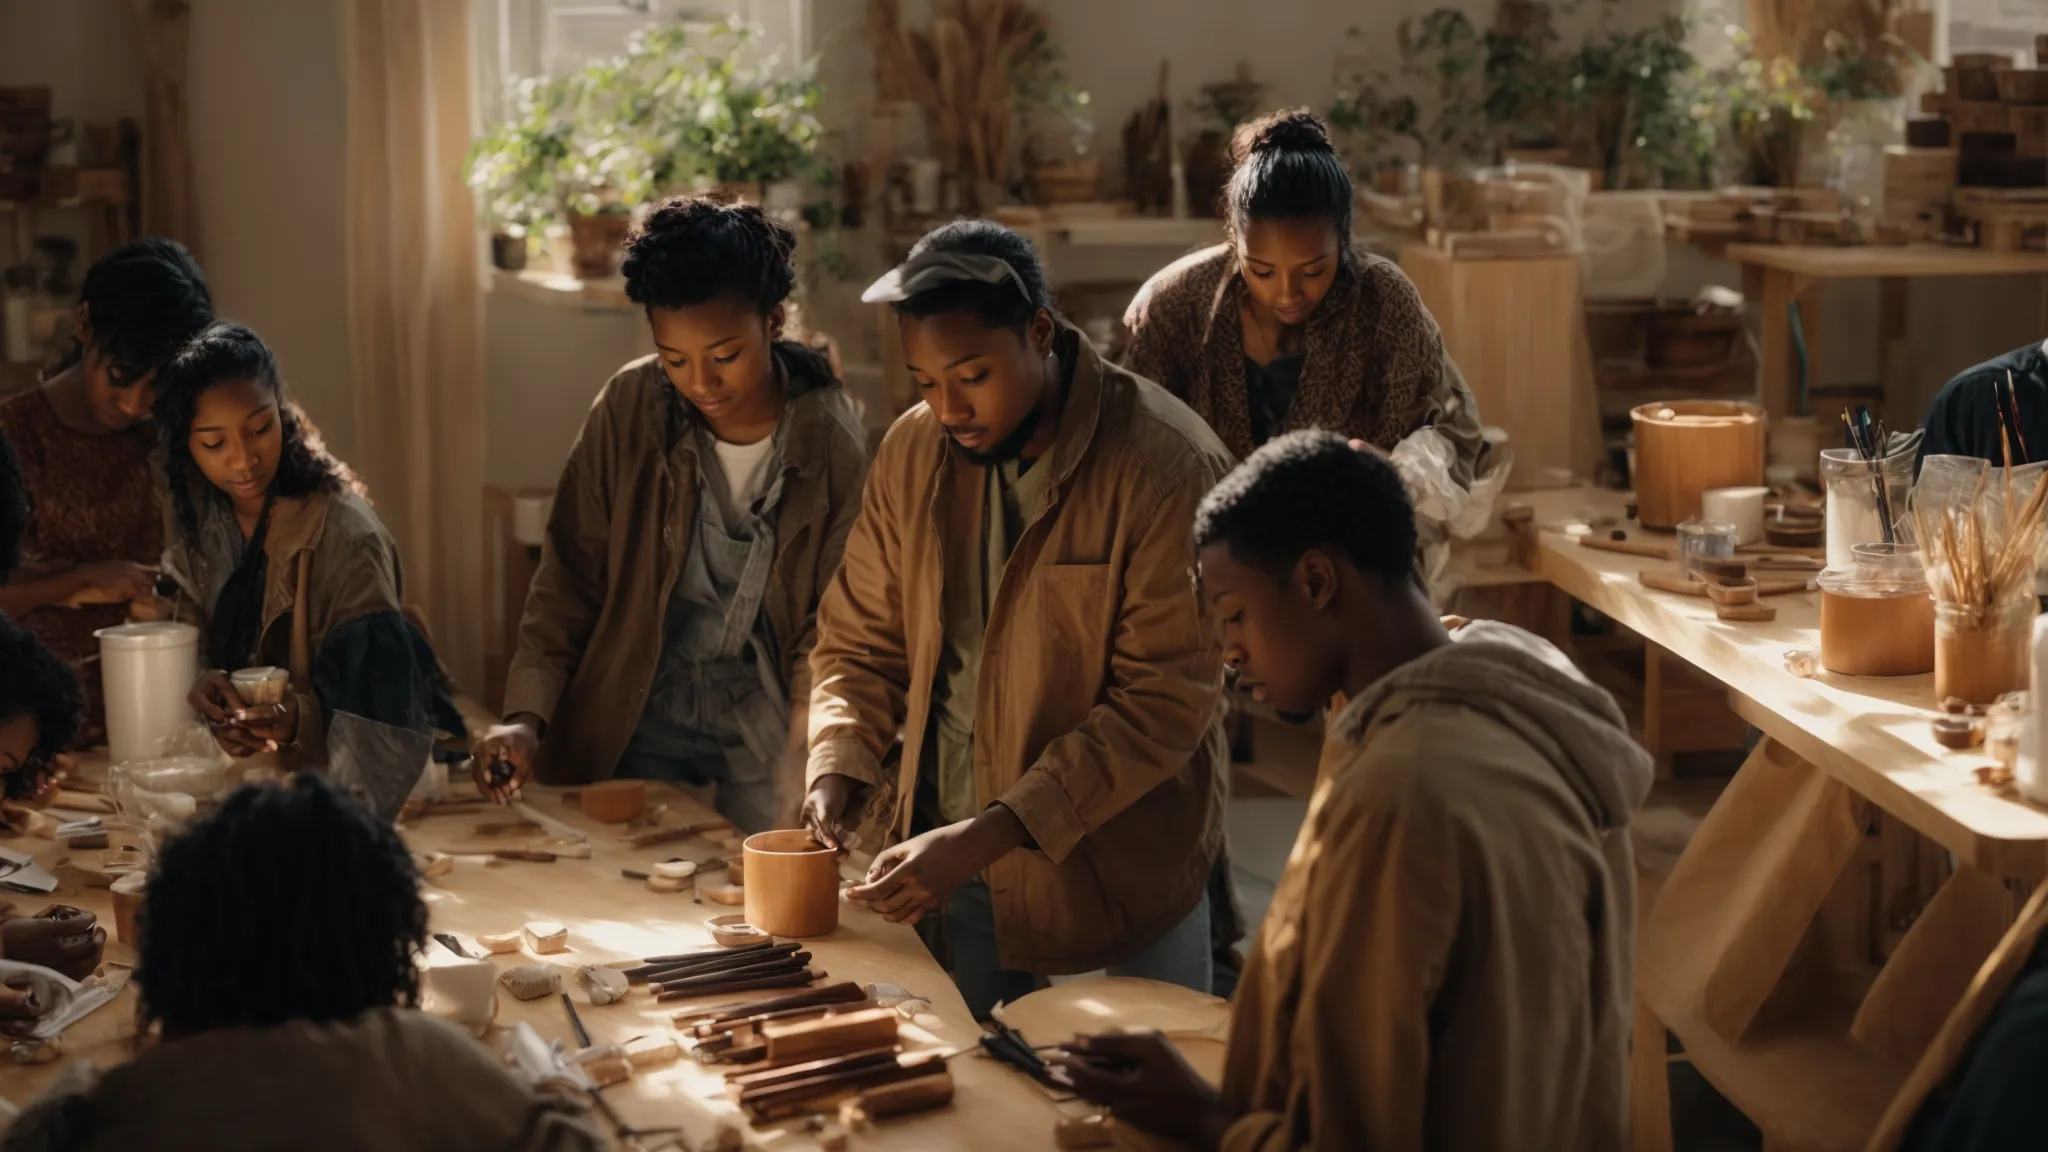 a diverse group of people gather around a worktable engaging in a creative craft workshop under the warm glow of natural light.